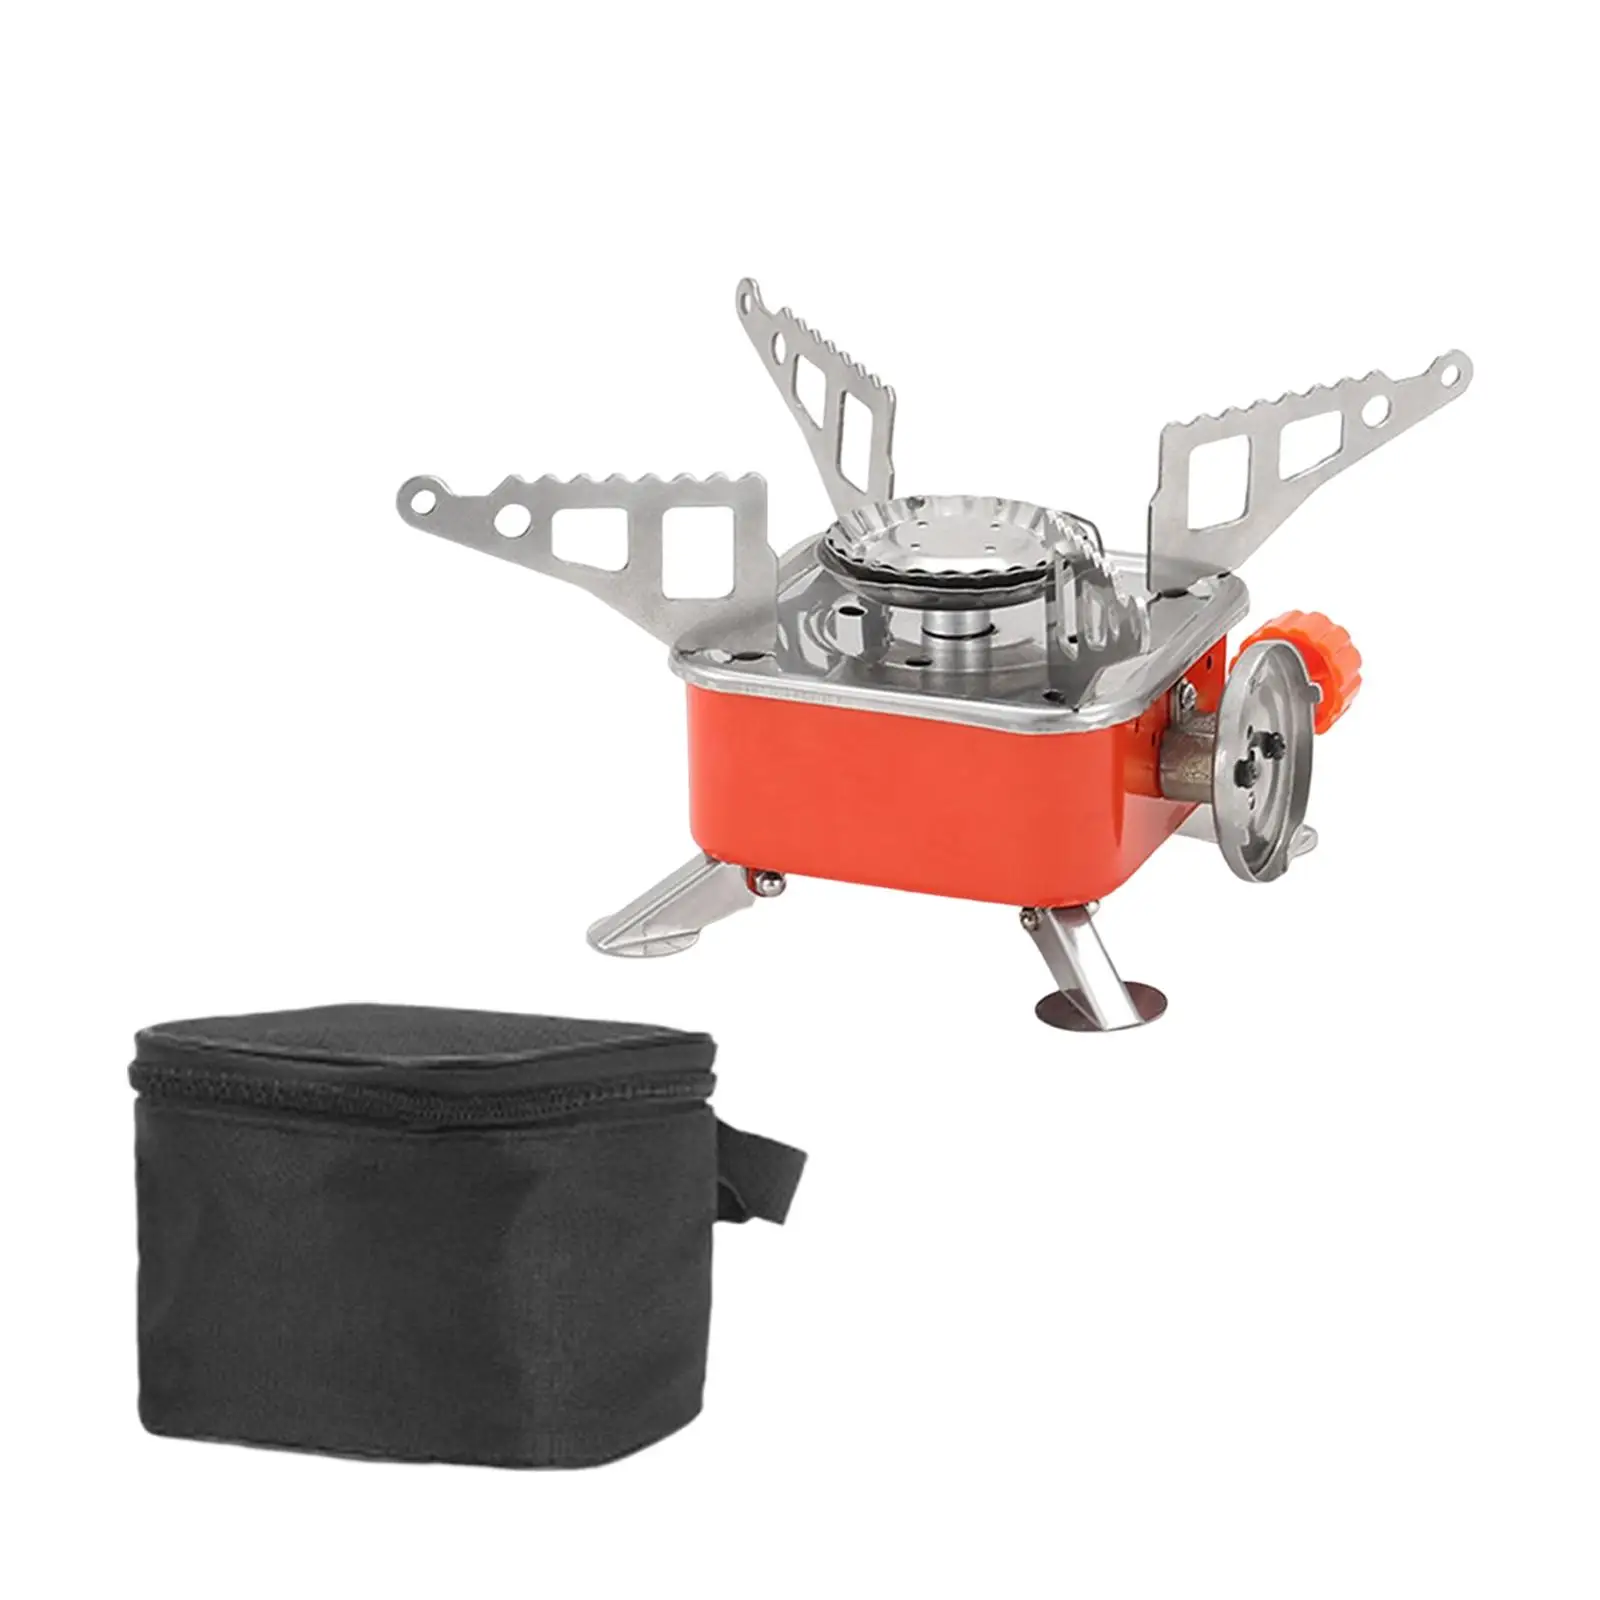 Camping Gas Stove with Storage Case Ultralight Stove Burner for Hiking